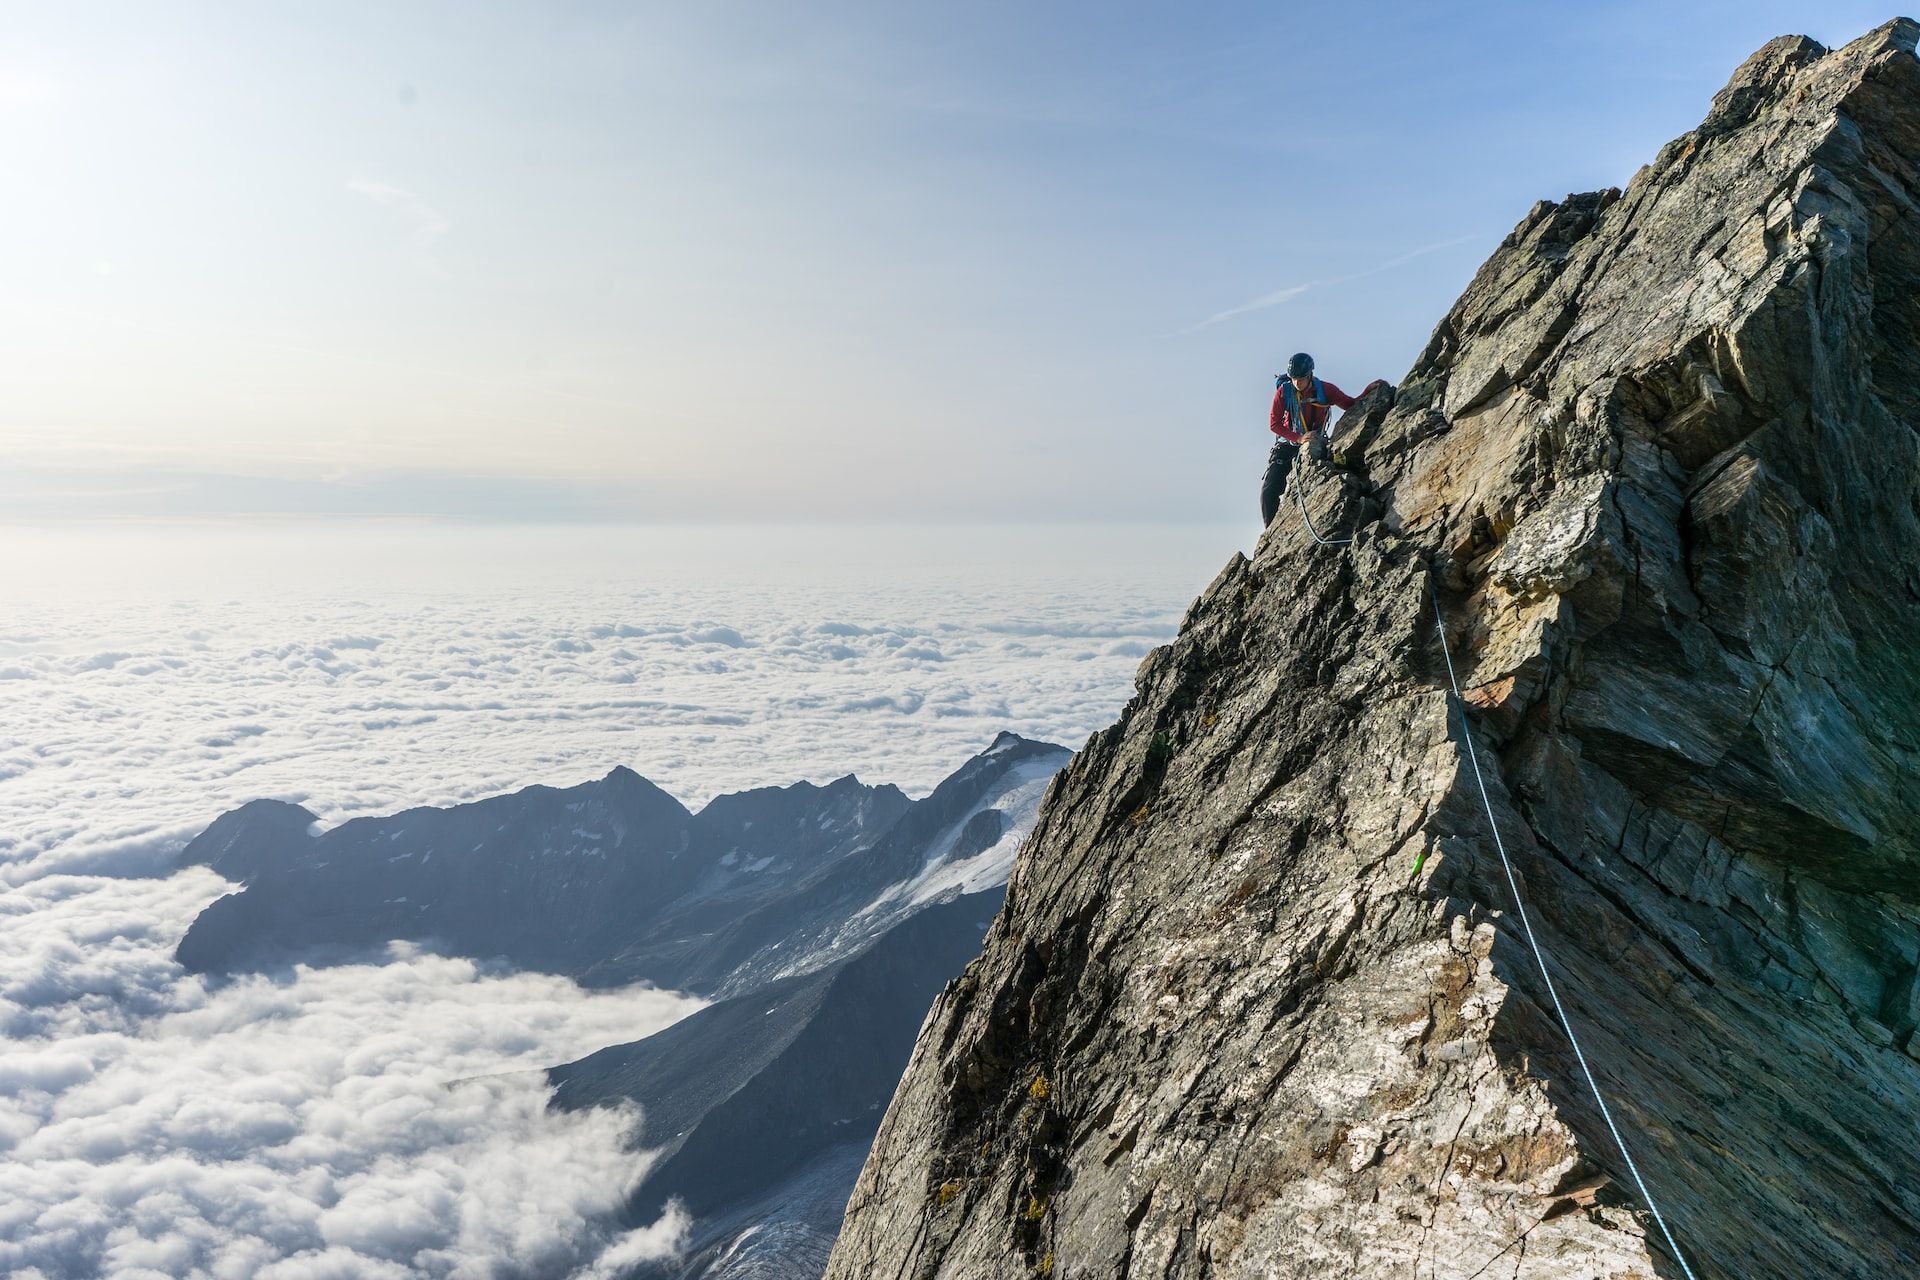 cliff climbing on a rock face above a sea of clouds